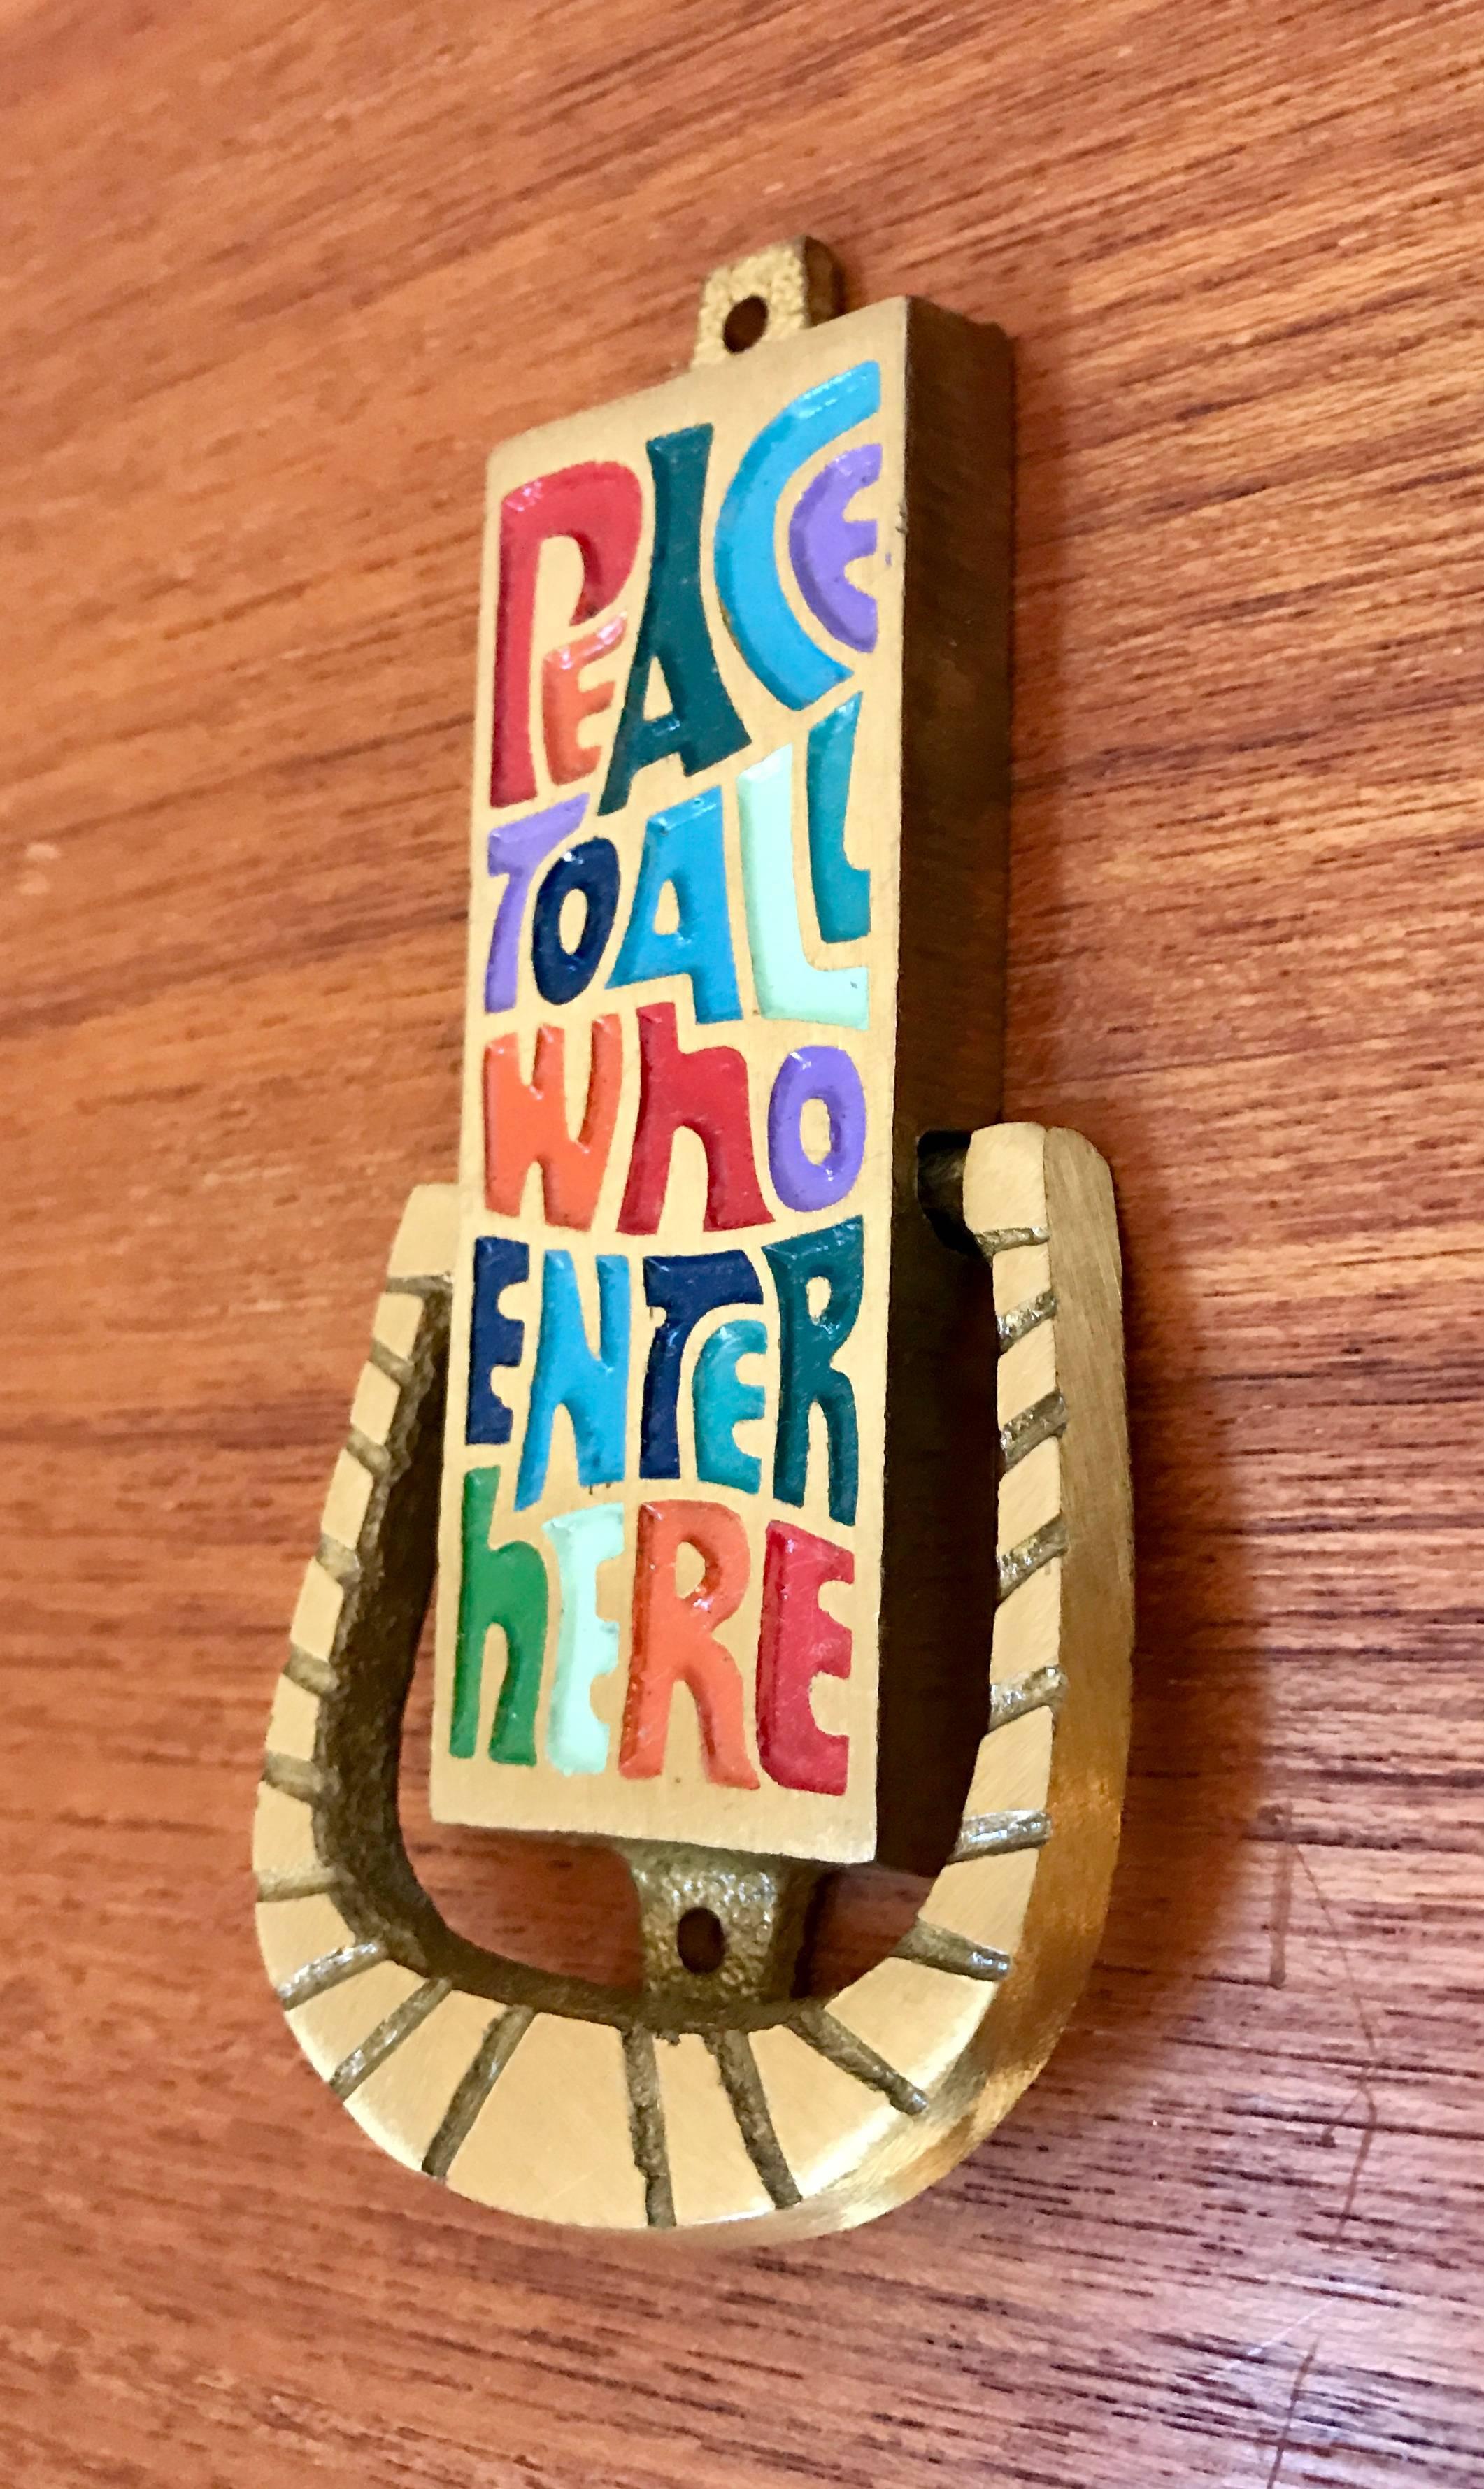 Very cool small midcentury door knocker titled "peace to all who enter here"  made of brass with colorful enameled lettering.  Manufactured by Terra Sancta Guild, Isreal, 1969